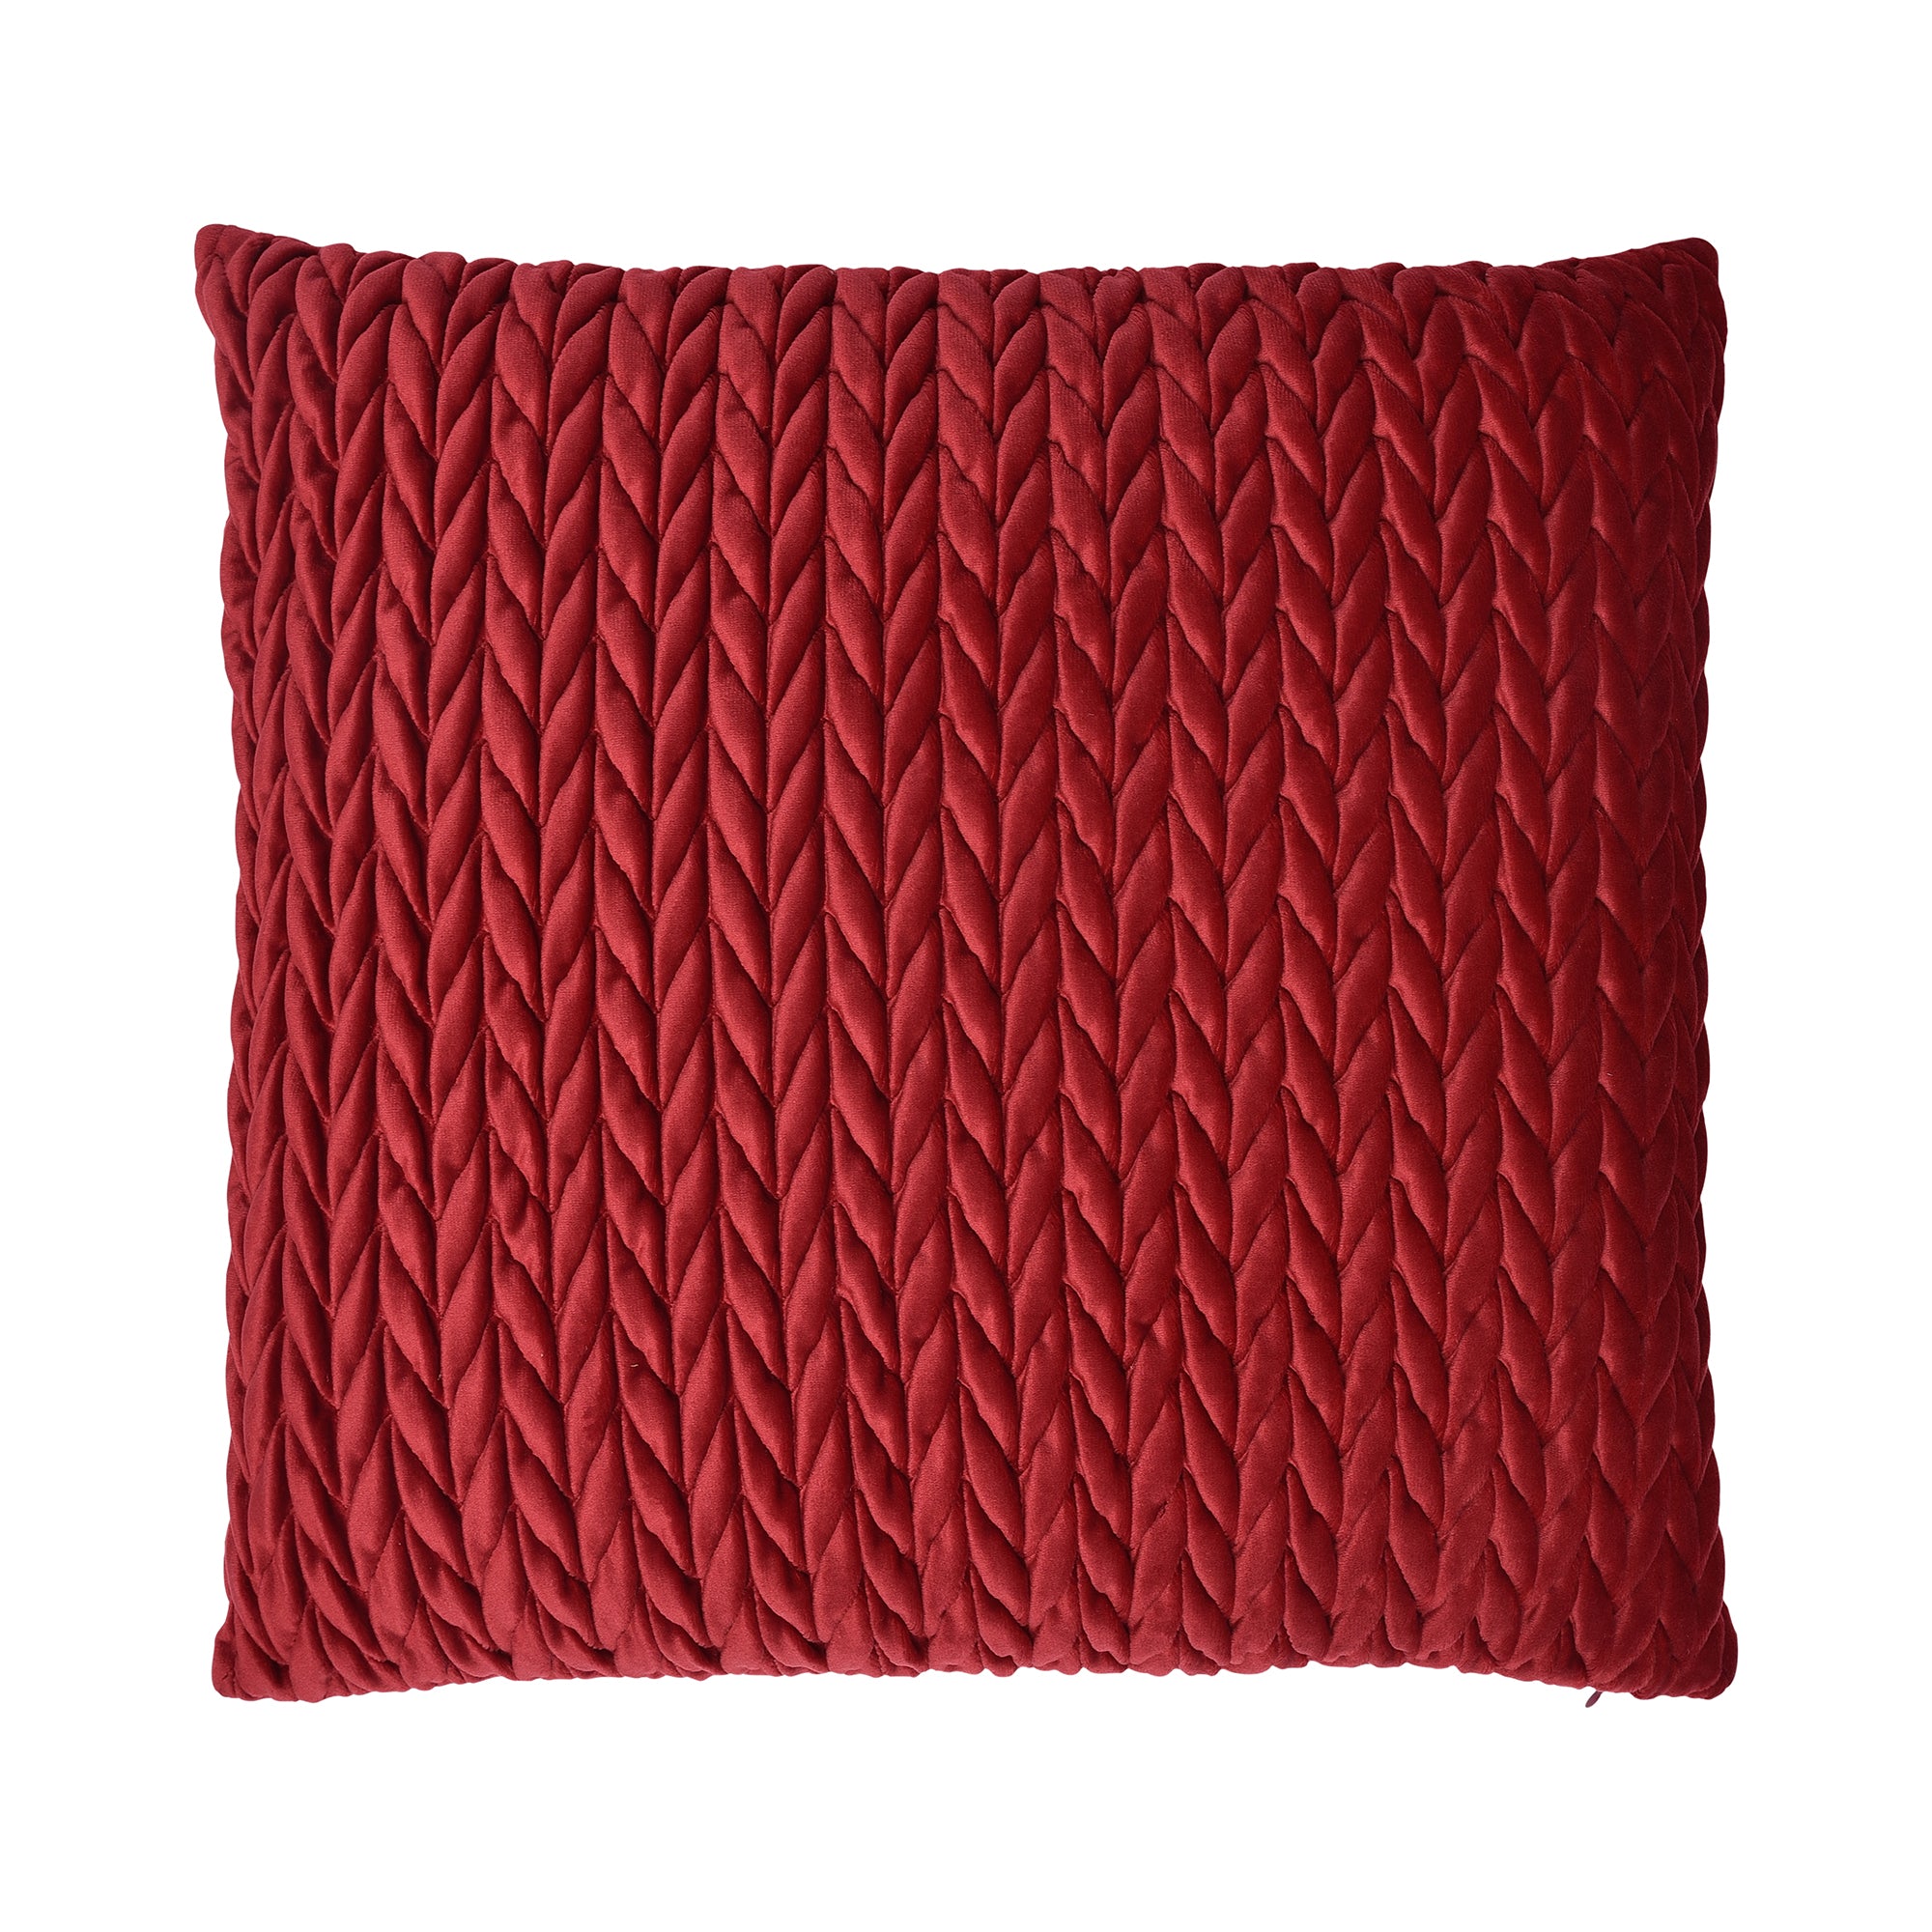 Filled Cushion Amory by Laurence Llewelyn-Bowen in Claret